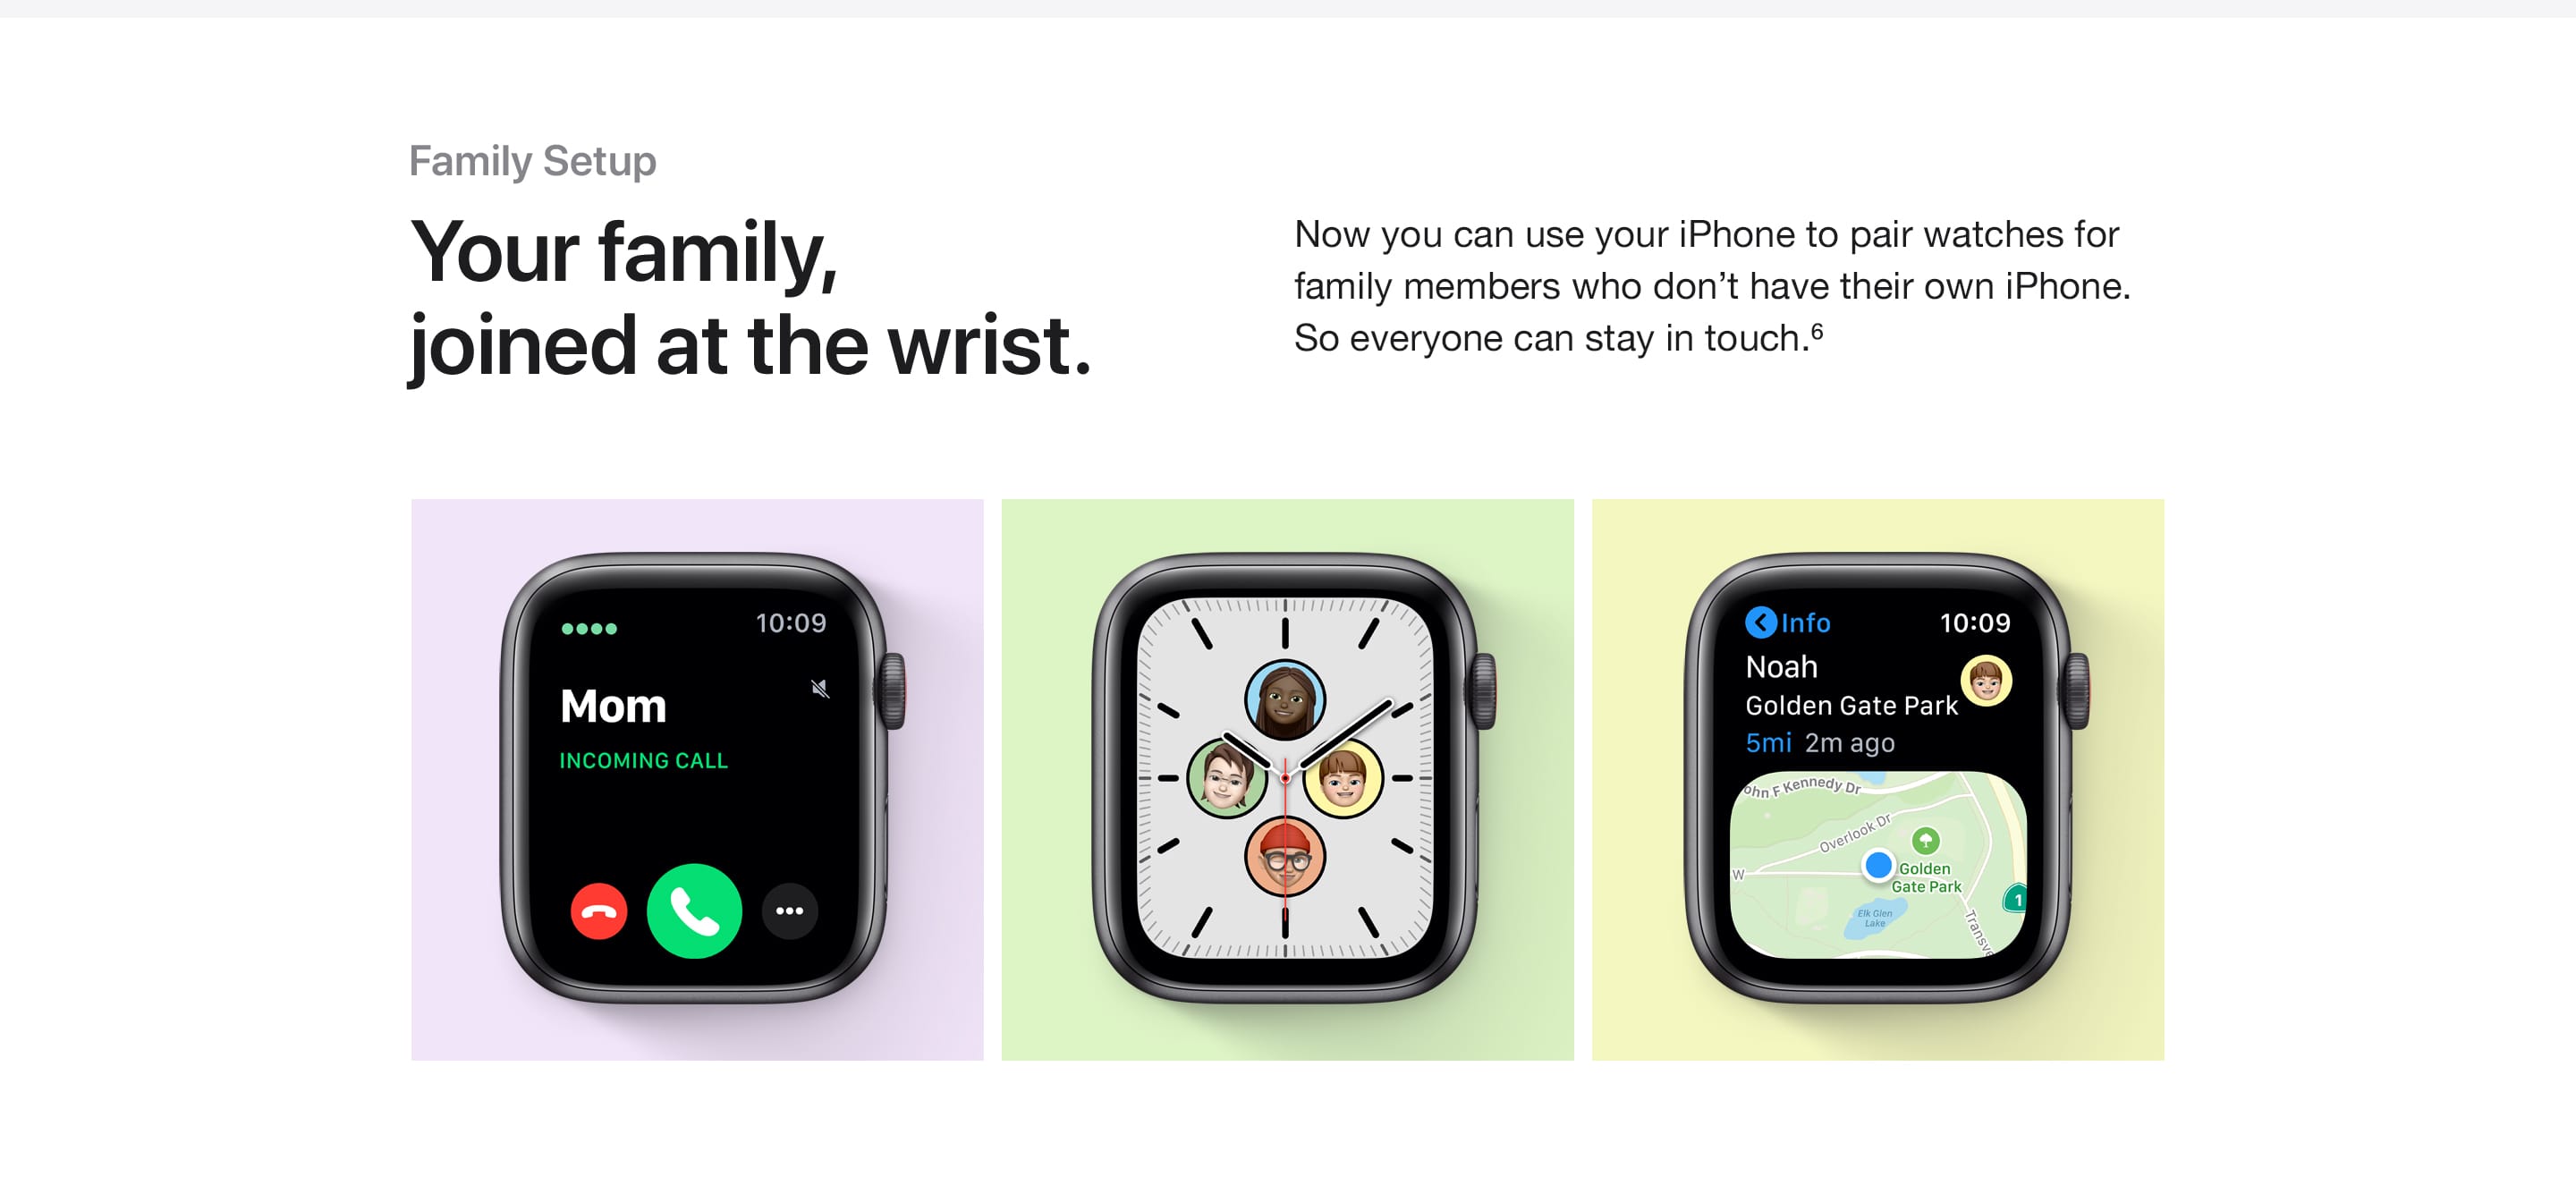 Family Setup. Your family, joined at the wrist. Now you can use your iPhone to pair watches for family members who don't have their own iPhone. So everyone can stay in touch.(6)